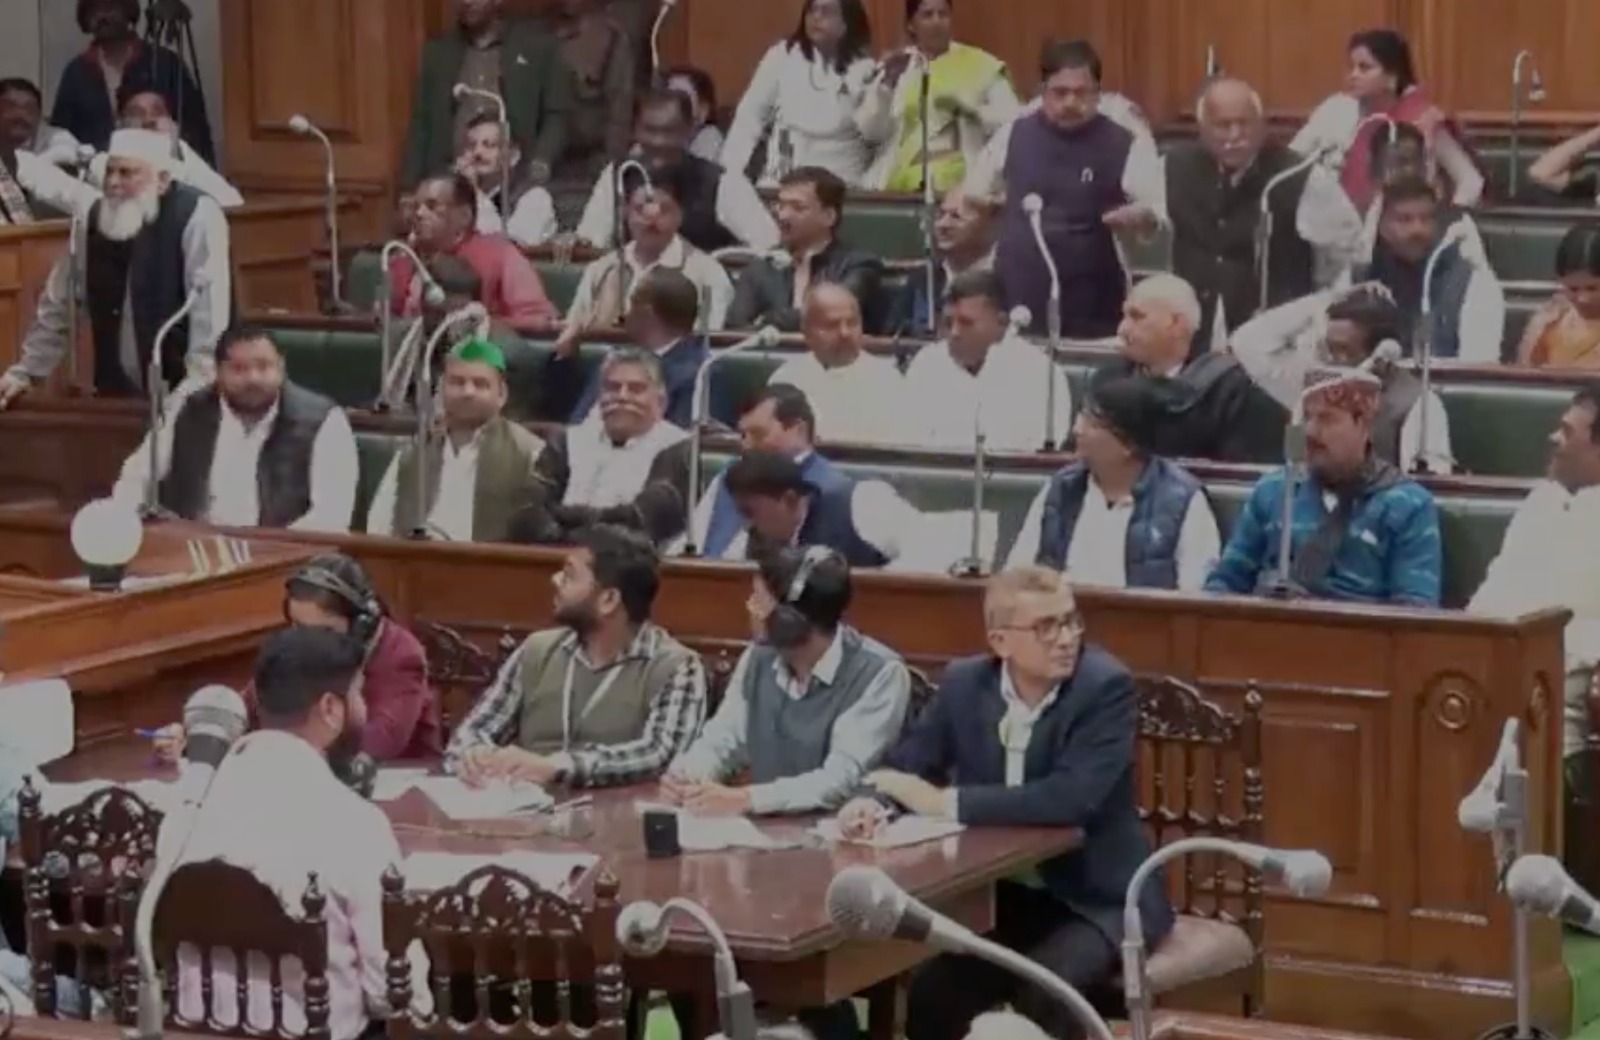 bihar-assembly-passes-no-confidence-motion-against-speaker-ahead-of-trust-vote